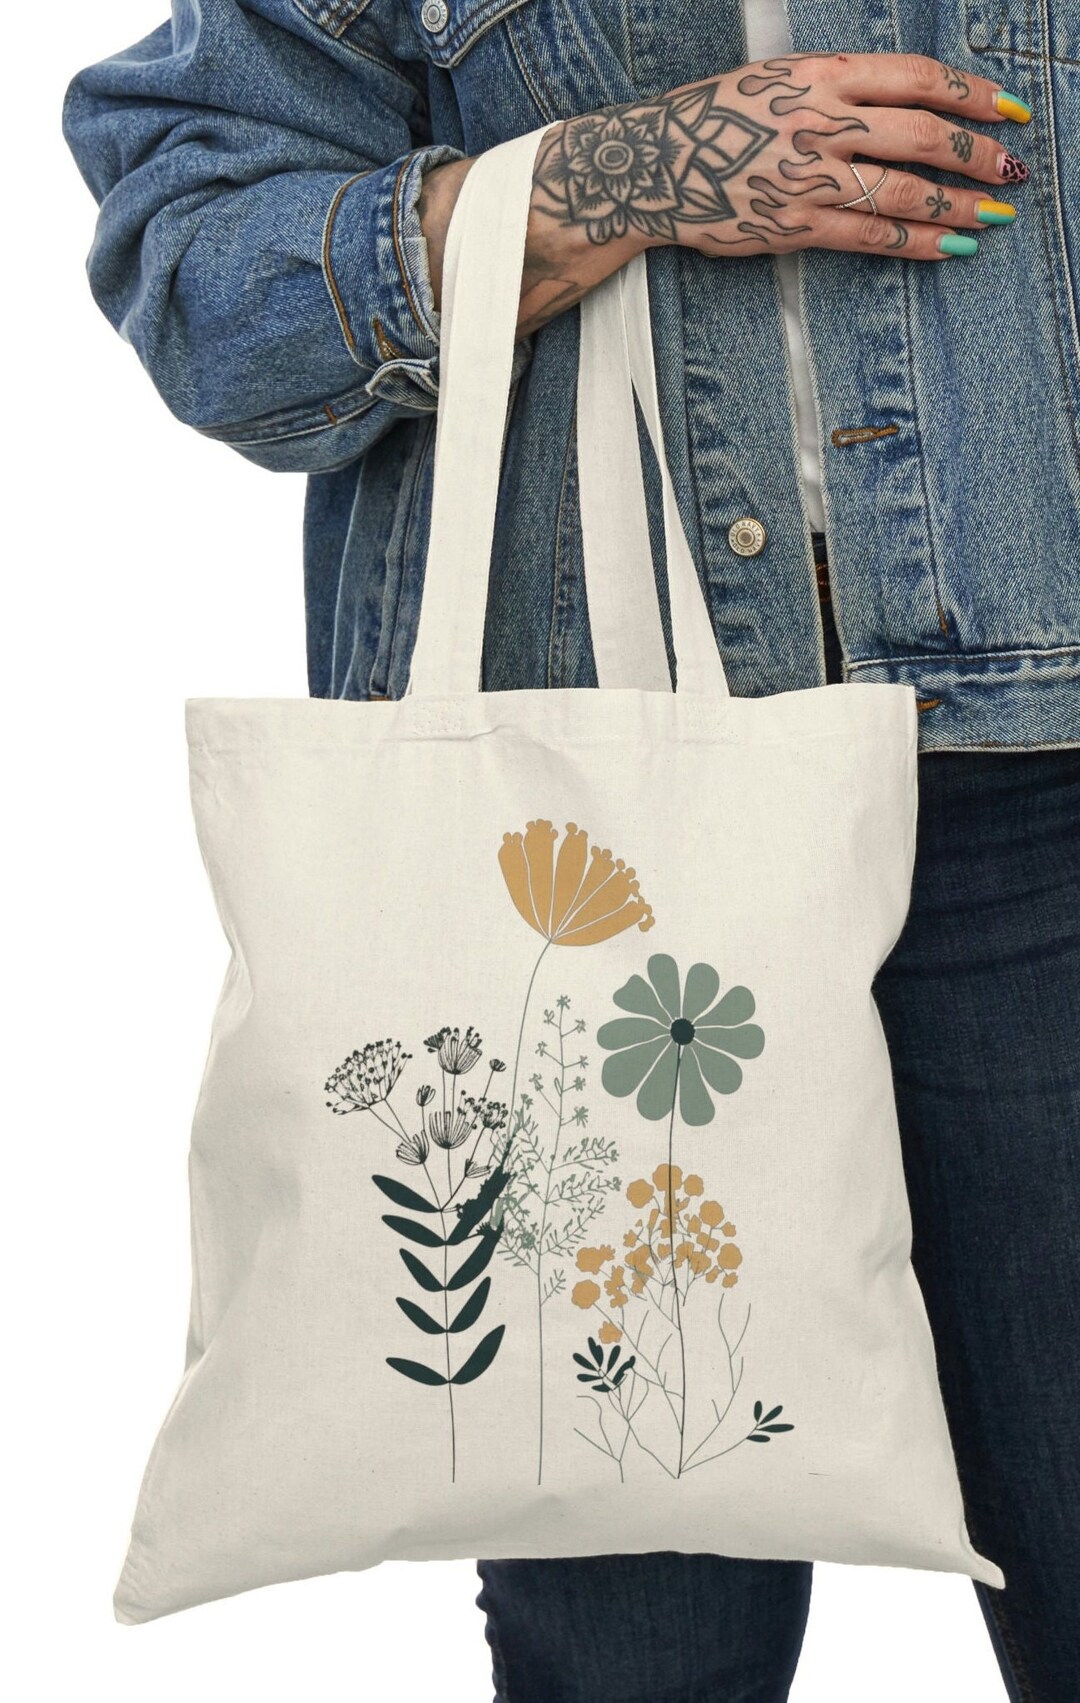 Floral Boho Chic Natural Tote Canvas Bag With Flowers - Etsy